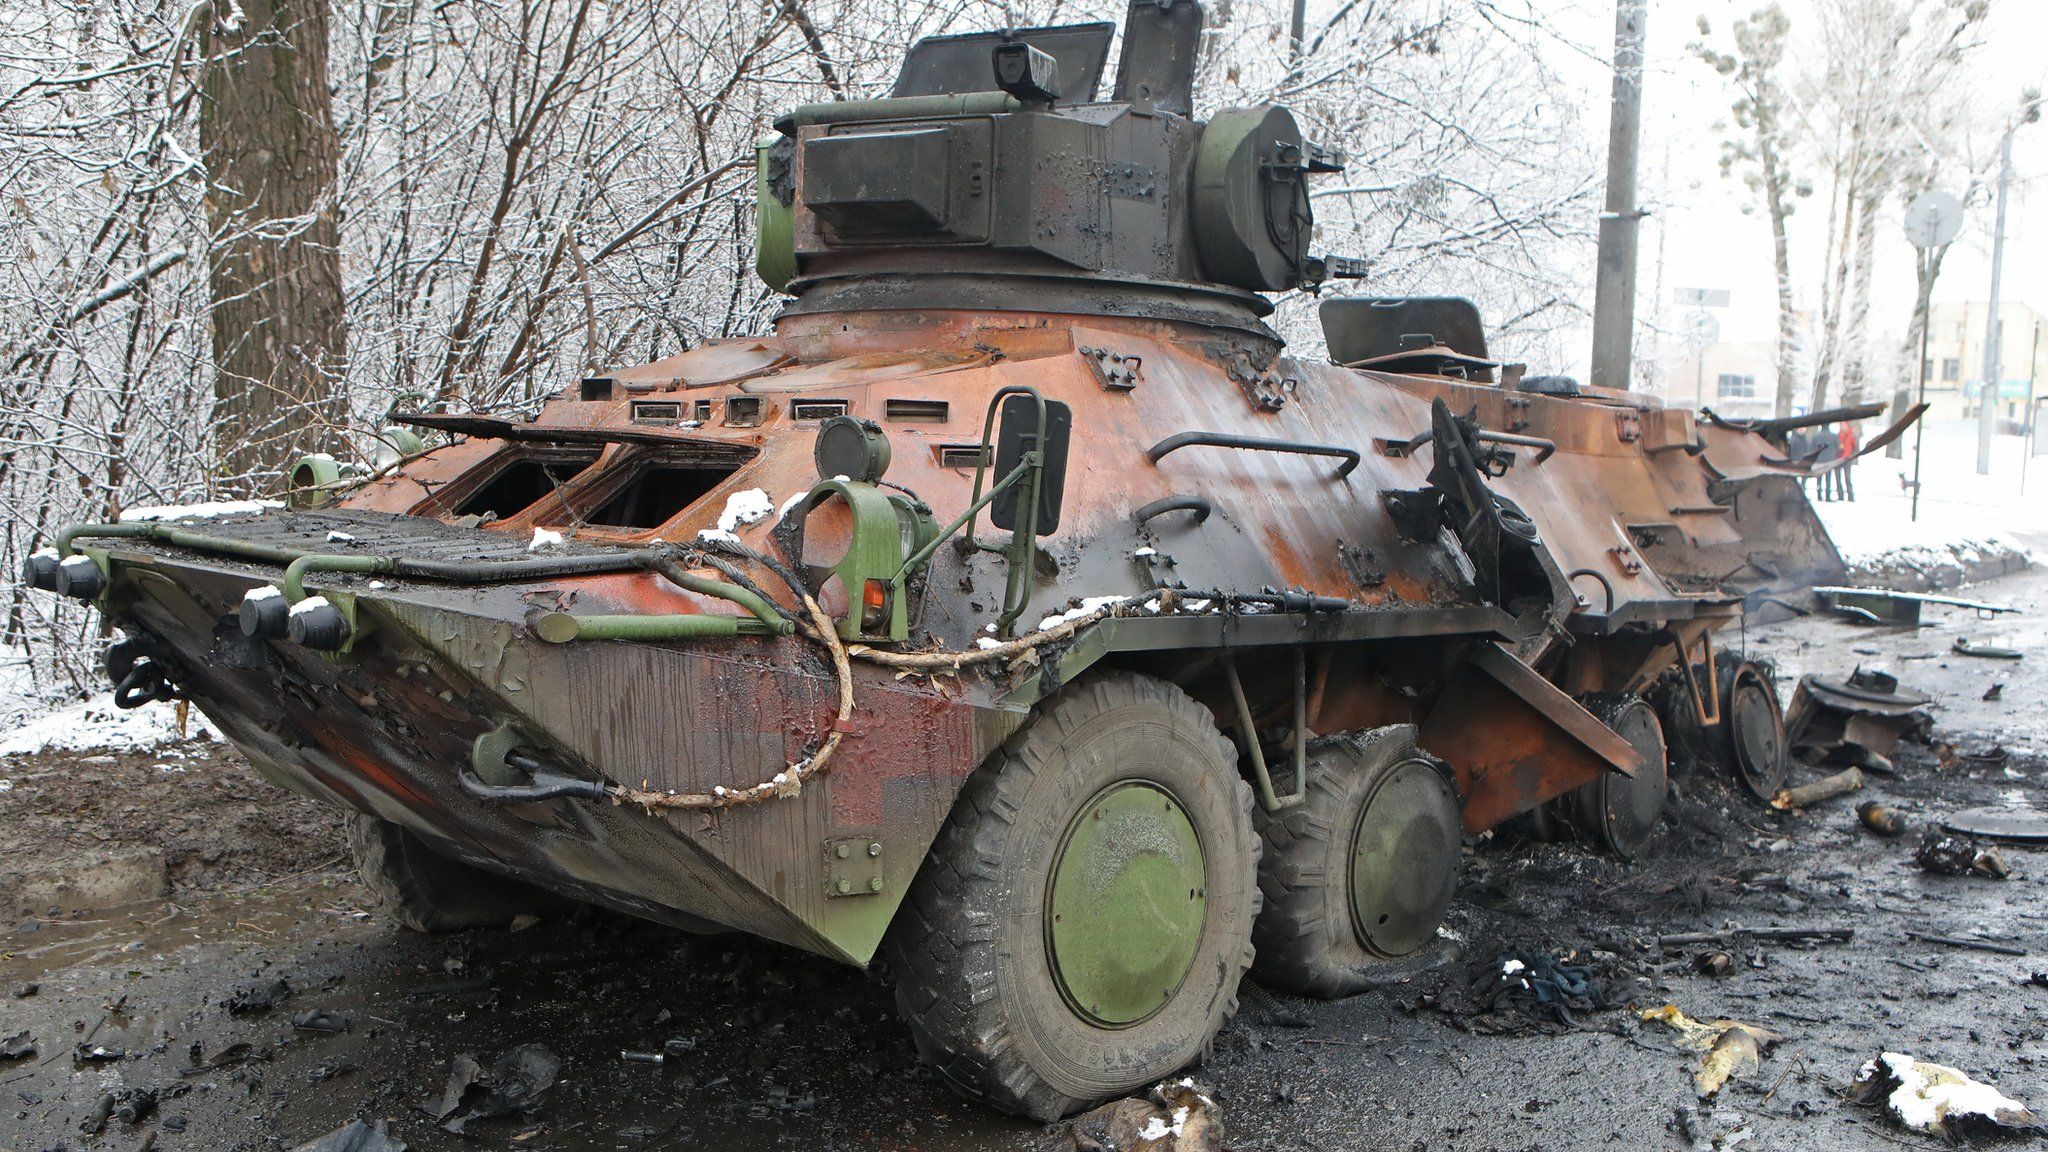 A view shows a destroyed armored personnel carrier on the roadside in Kharkiv